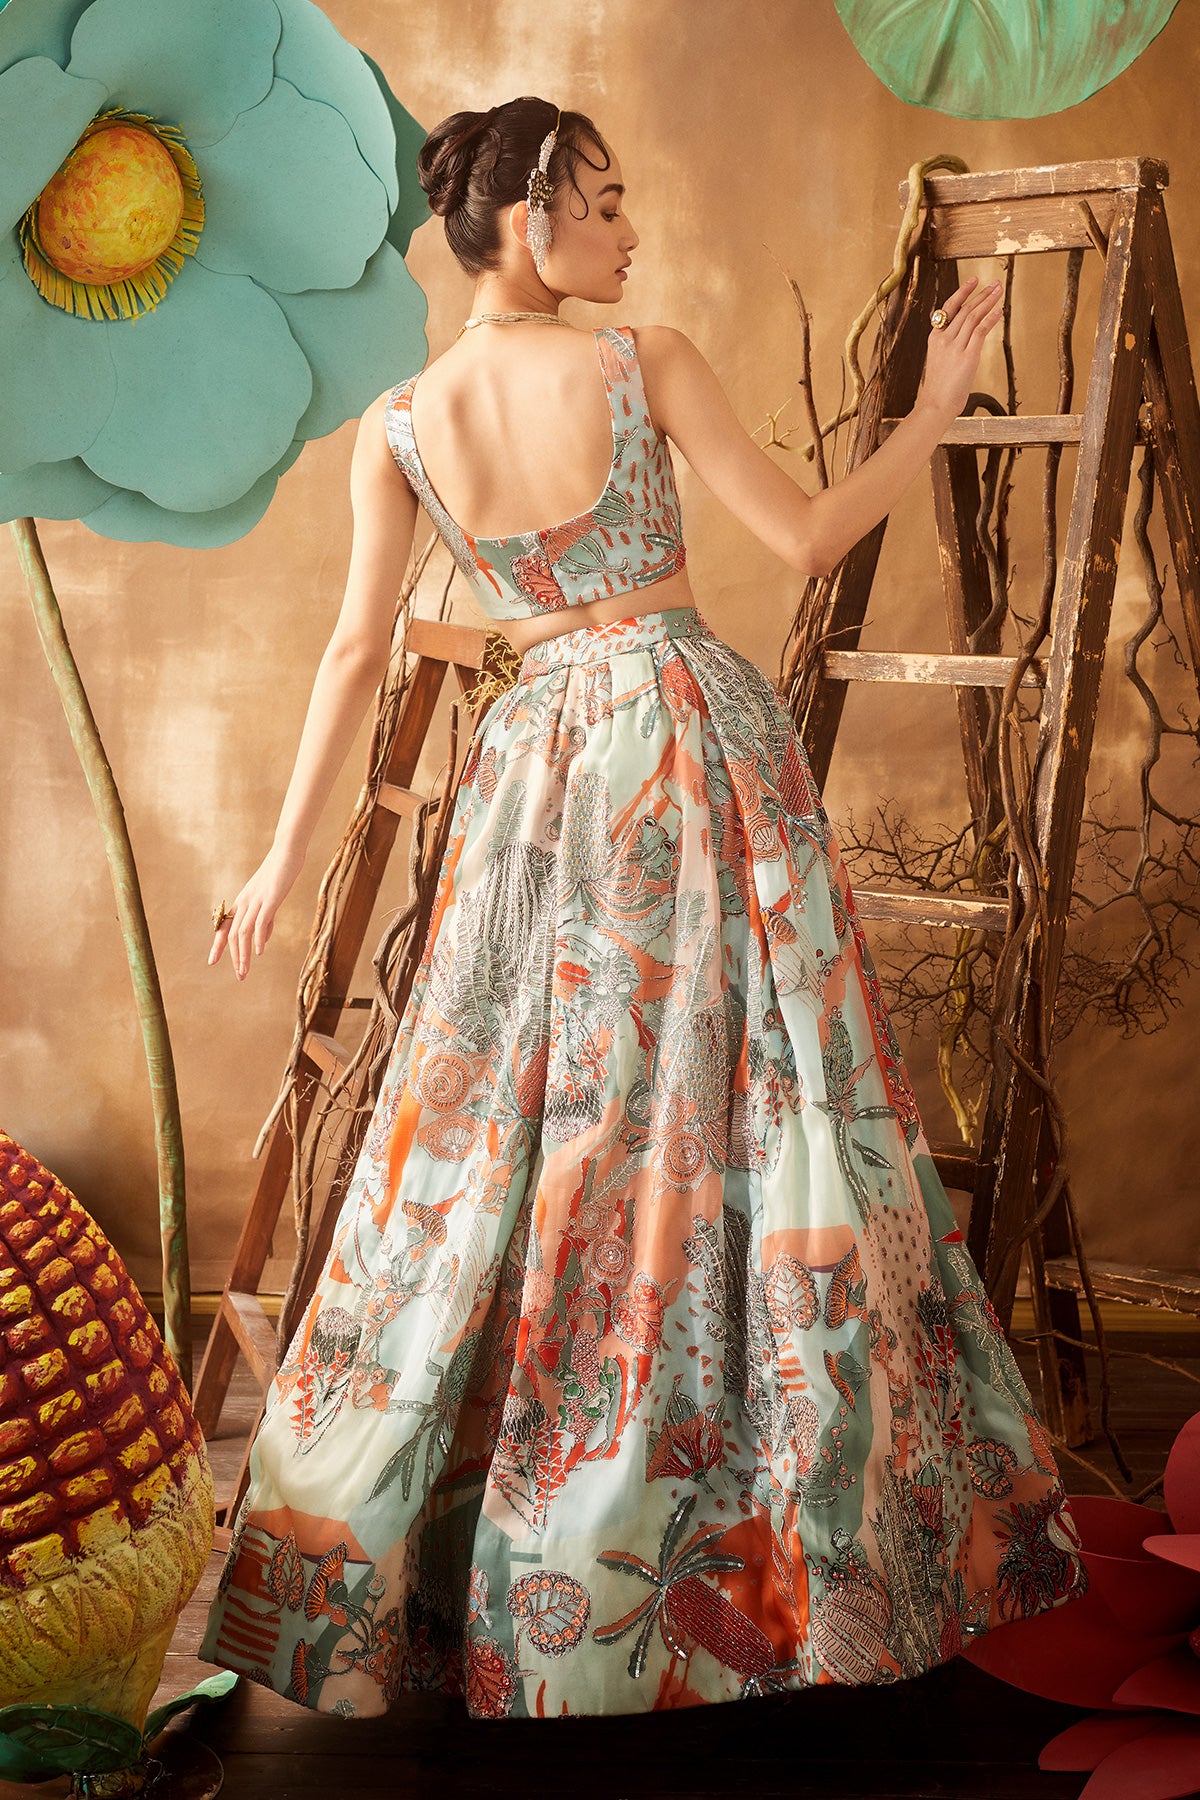 Powder Blue Pastiche Organza Printed And Embellished Top And Skirt With Cutwork Dupatta